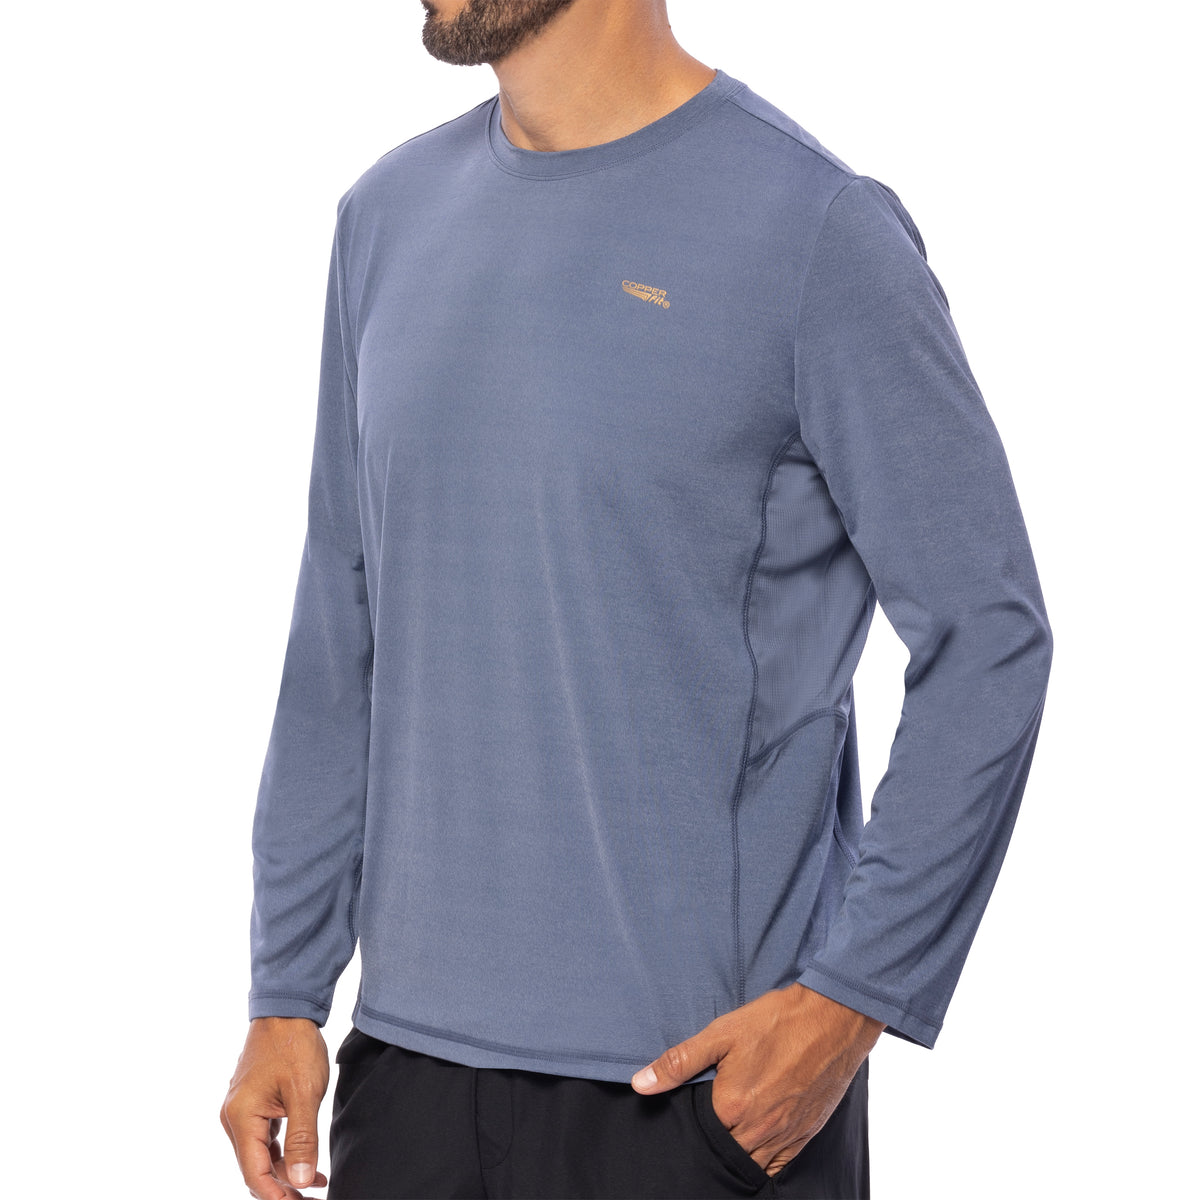 All In Motion Men's Long Sleeve Performance T-Shirt - Copper Size